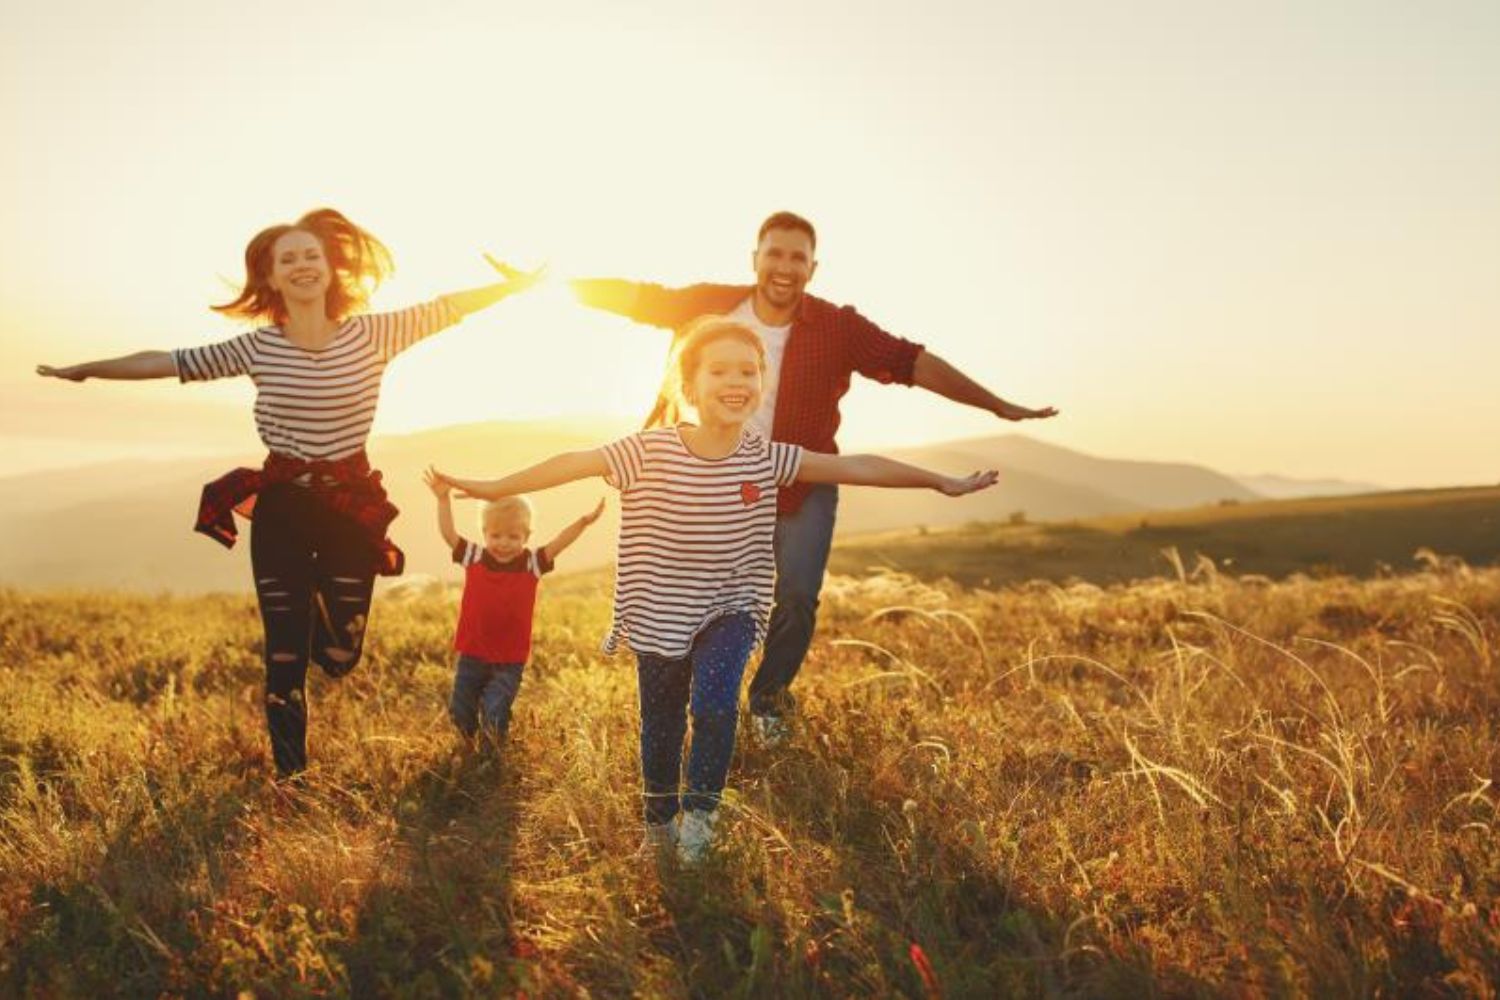 families running with arms wide open Photo by Evgeny Atamanenko on shutterstock